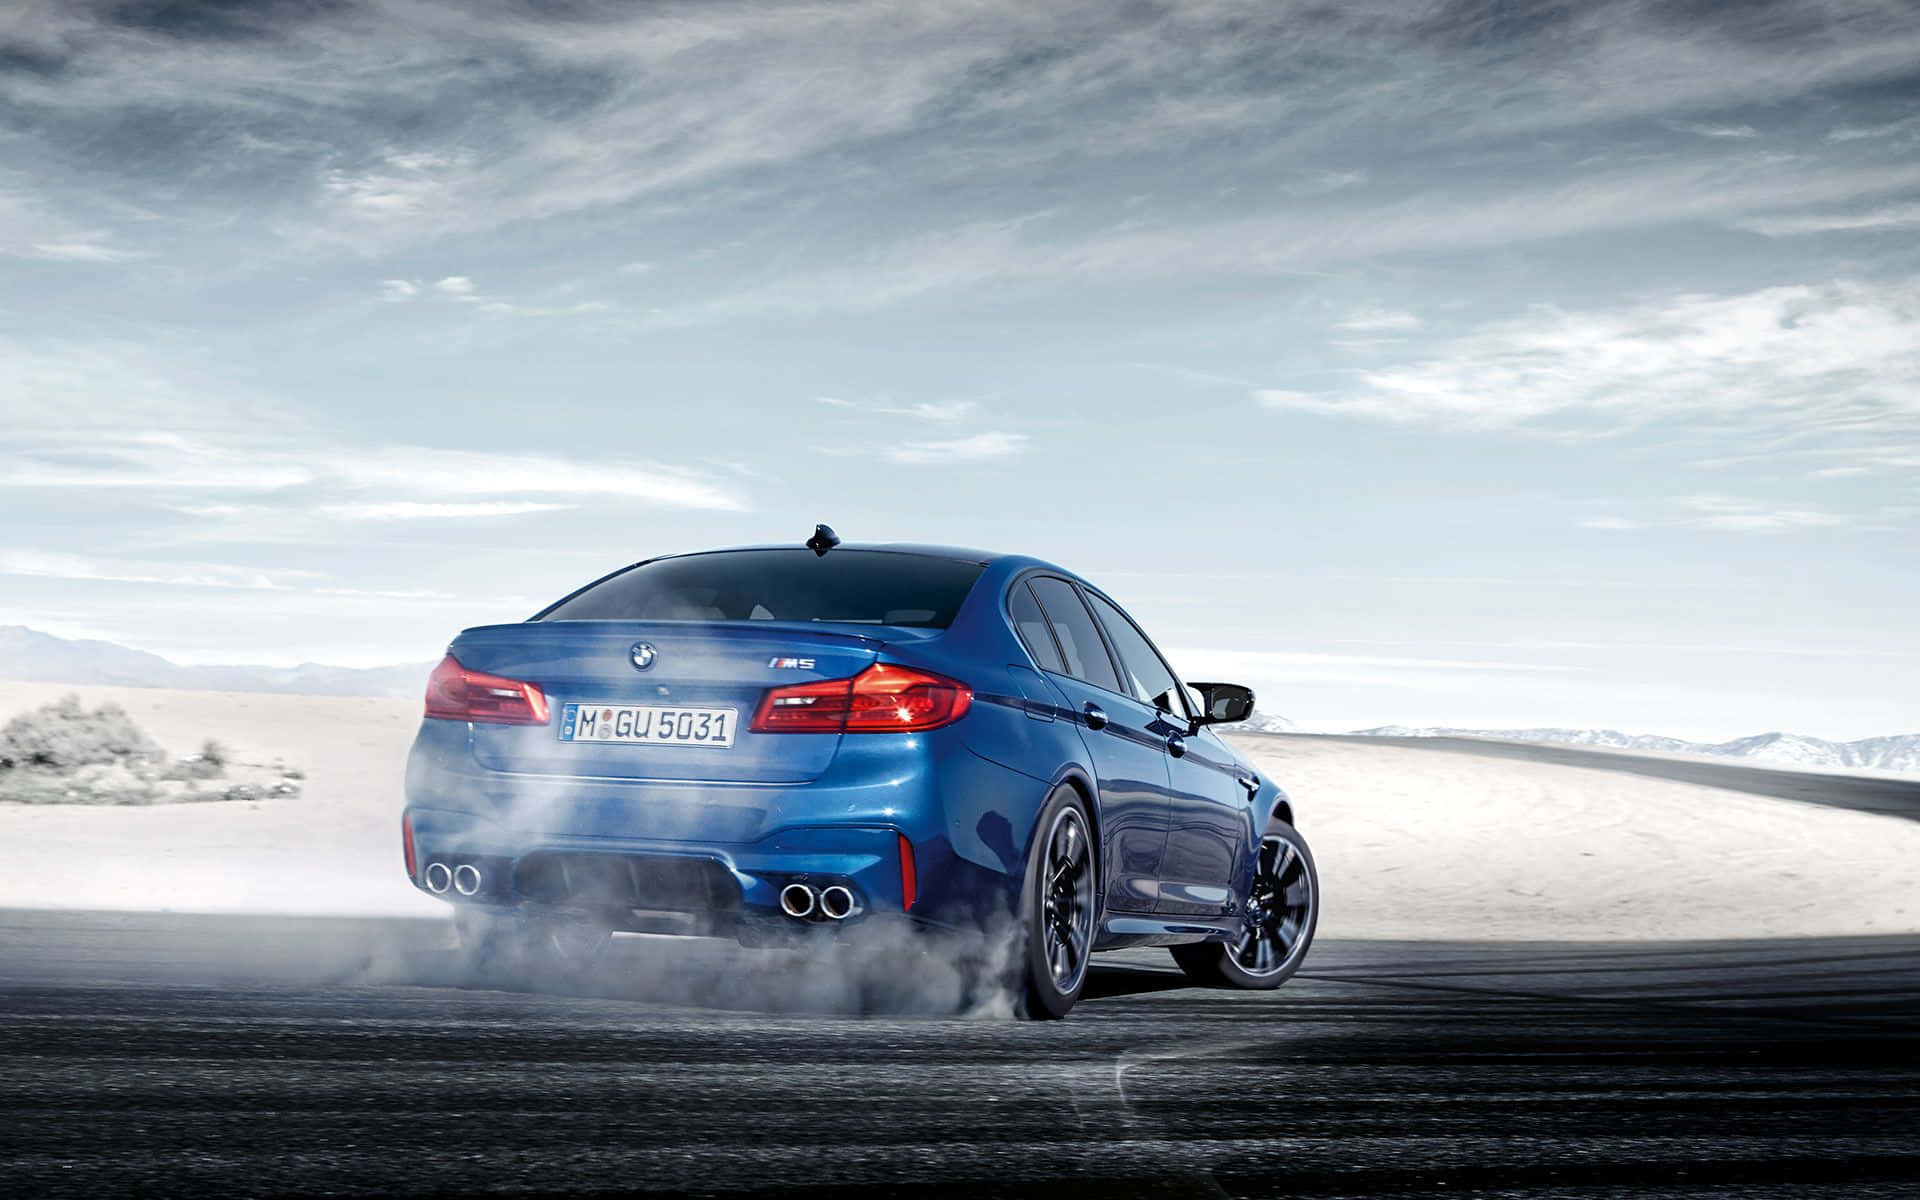 blue bmw m5 wallpapers